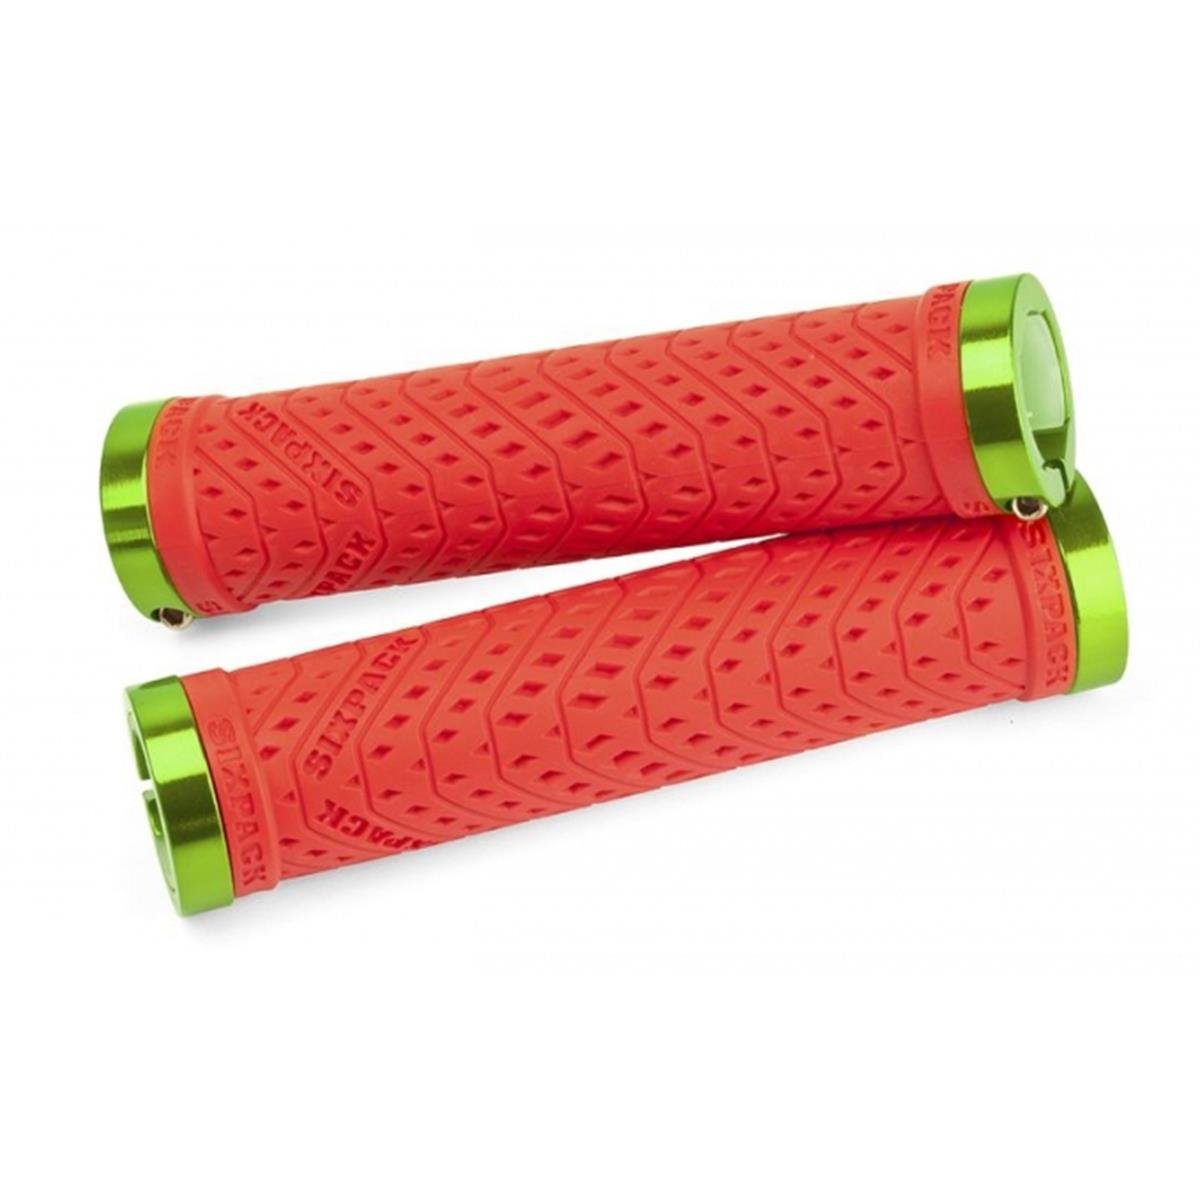 Sixpack Grips VTT K-Trix Red/Electric Green, Lock On System, 140 mm Length